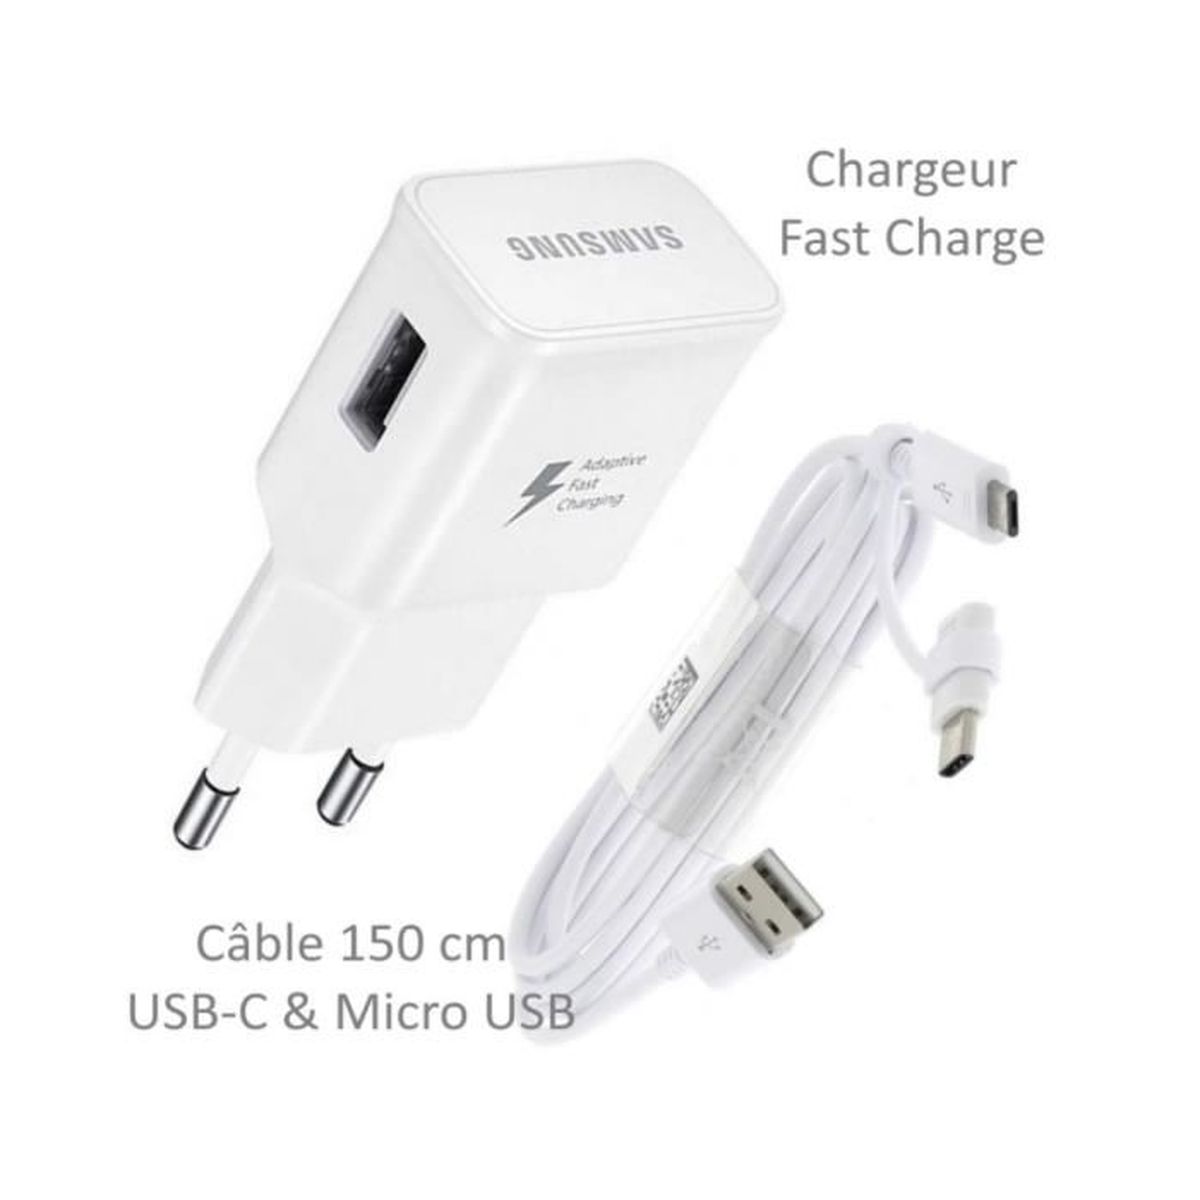 Cable Cordon Chargeur Usb-C Rapide 3A Original Samsung Galaxy S20 S20+  Ultra 5G